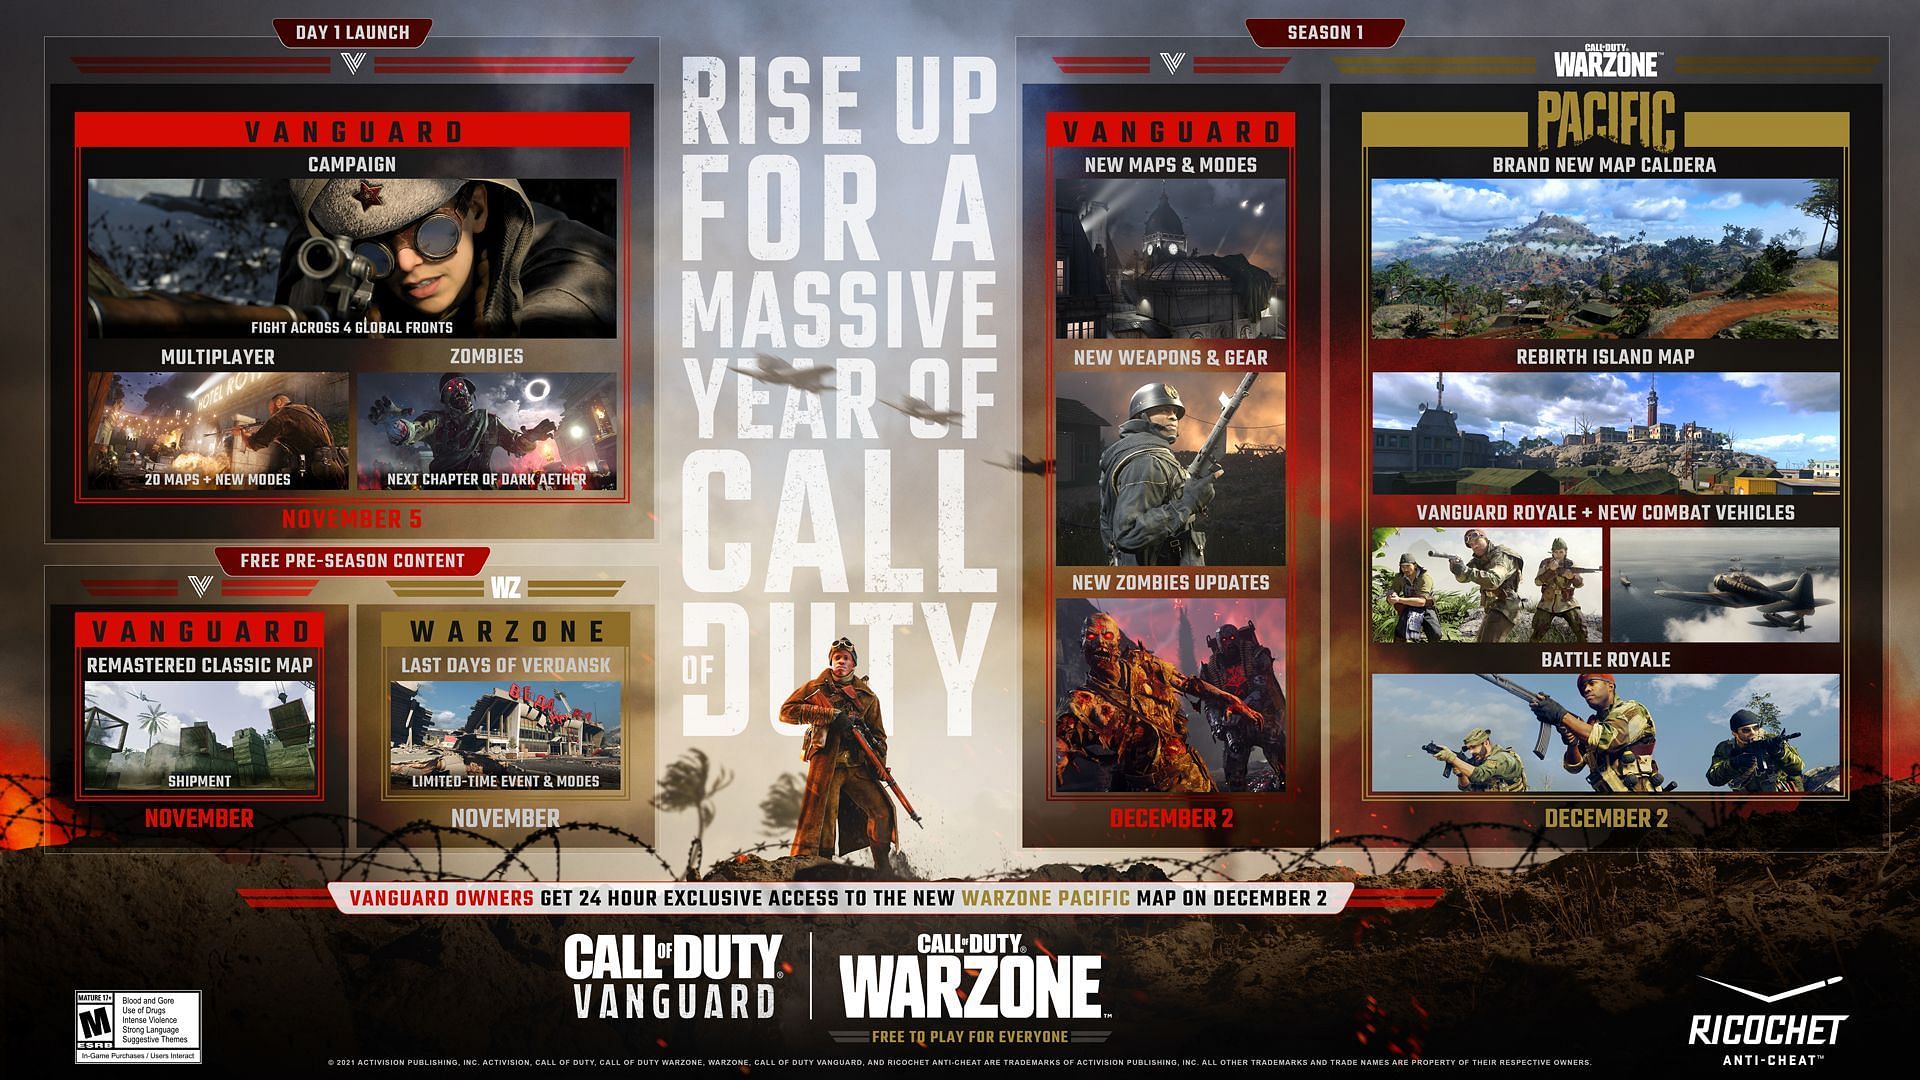 Call of Duty Vanguard Season 1 content plan (Image by Activision)